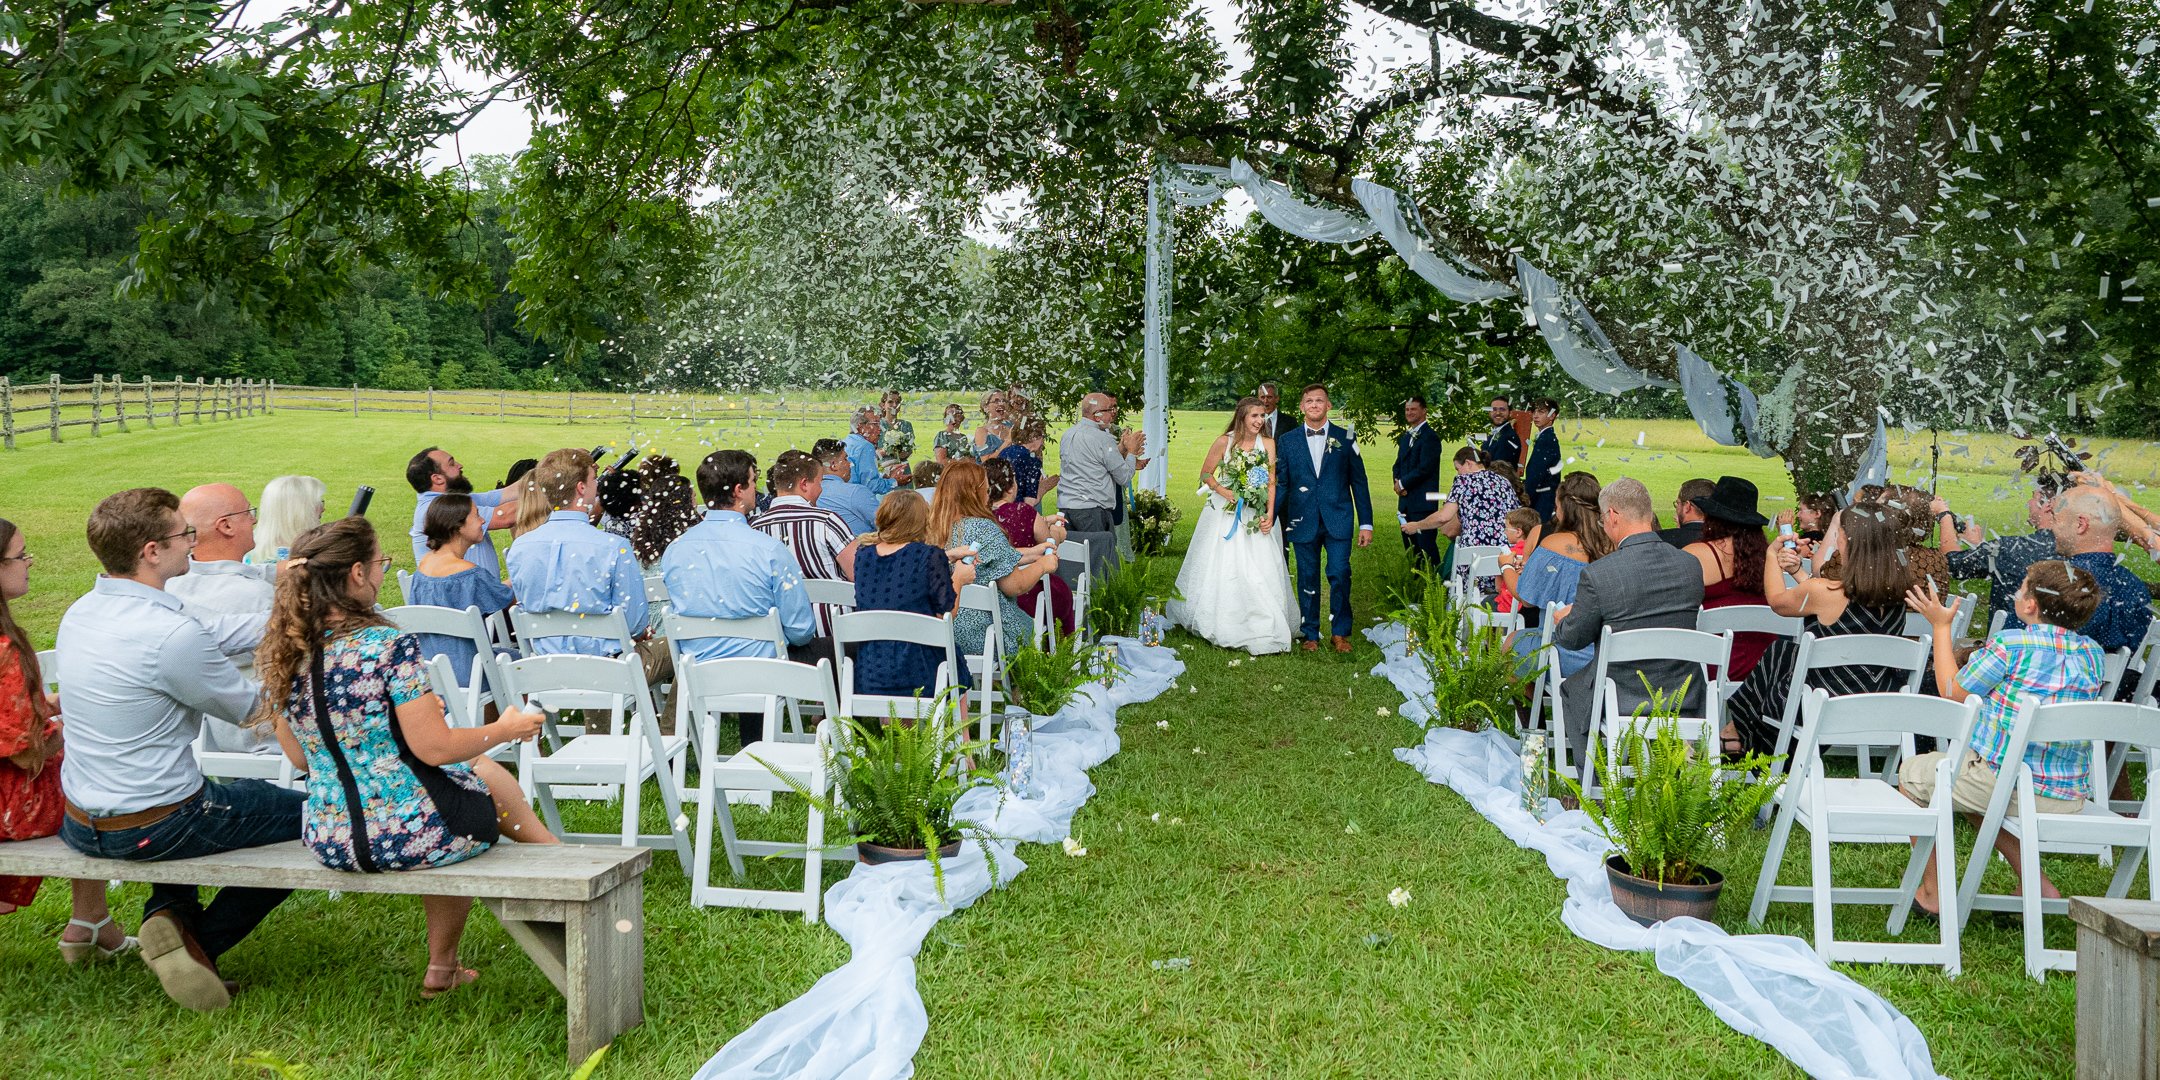 Confetti-Bomb-After-Outdoor-Wedding-Ceremony.jpeg